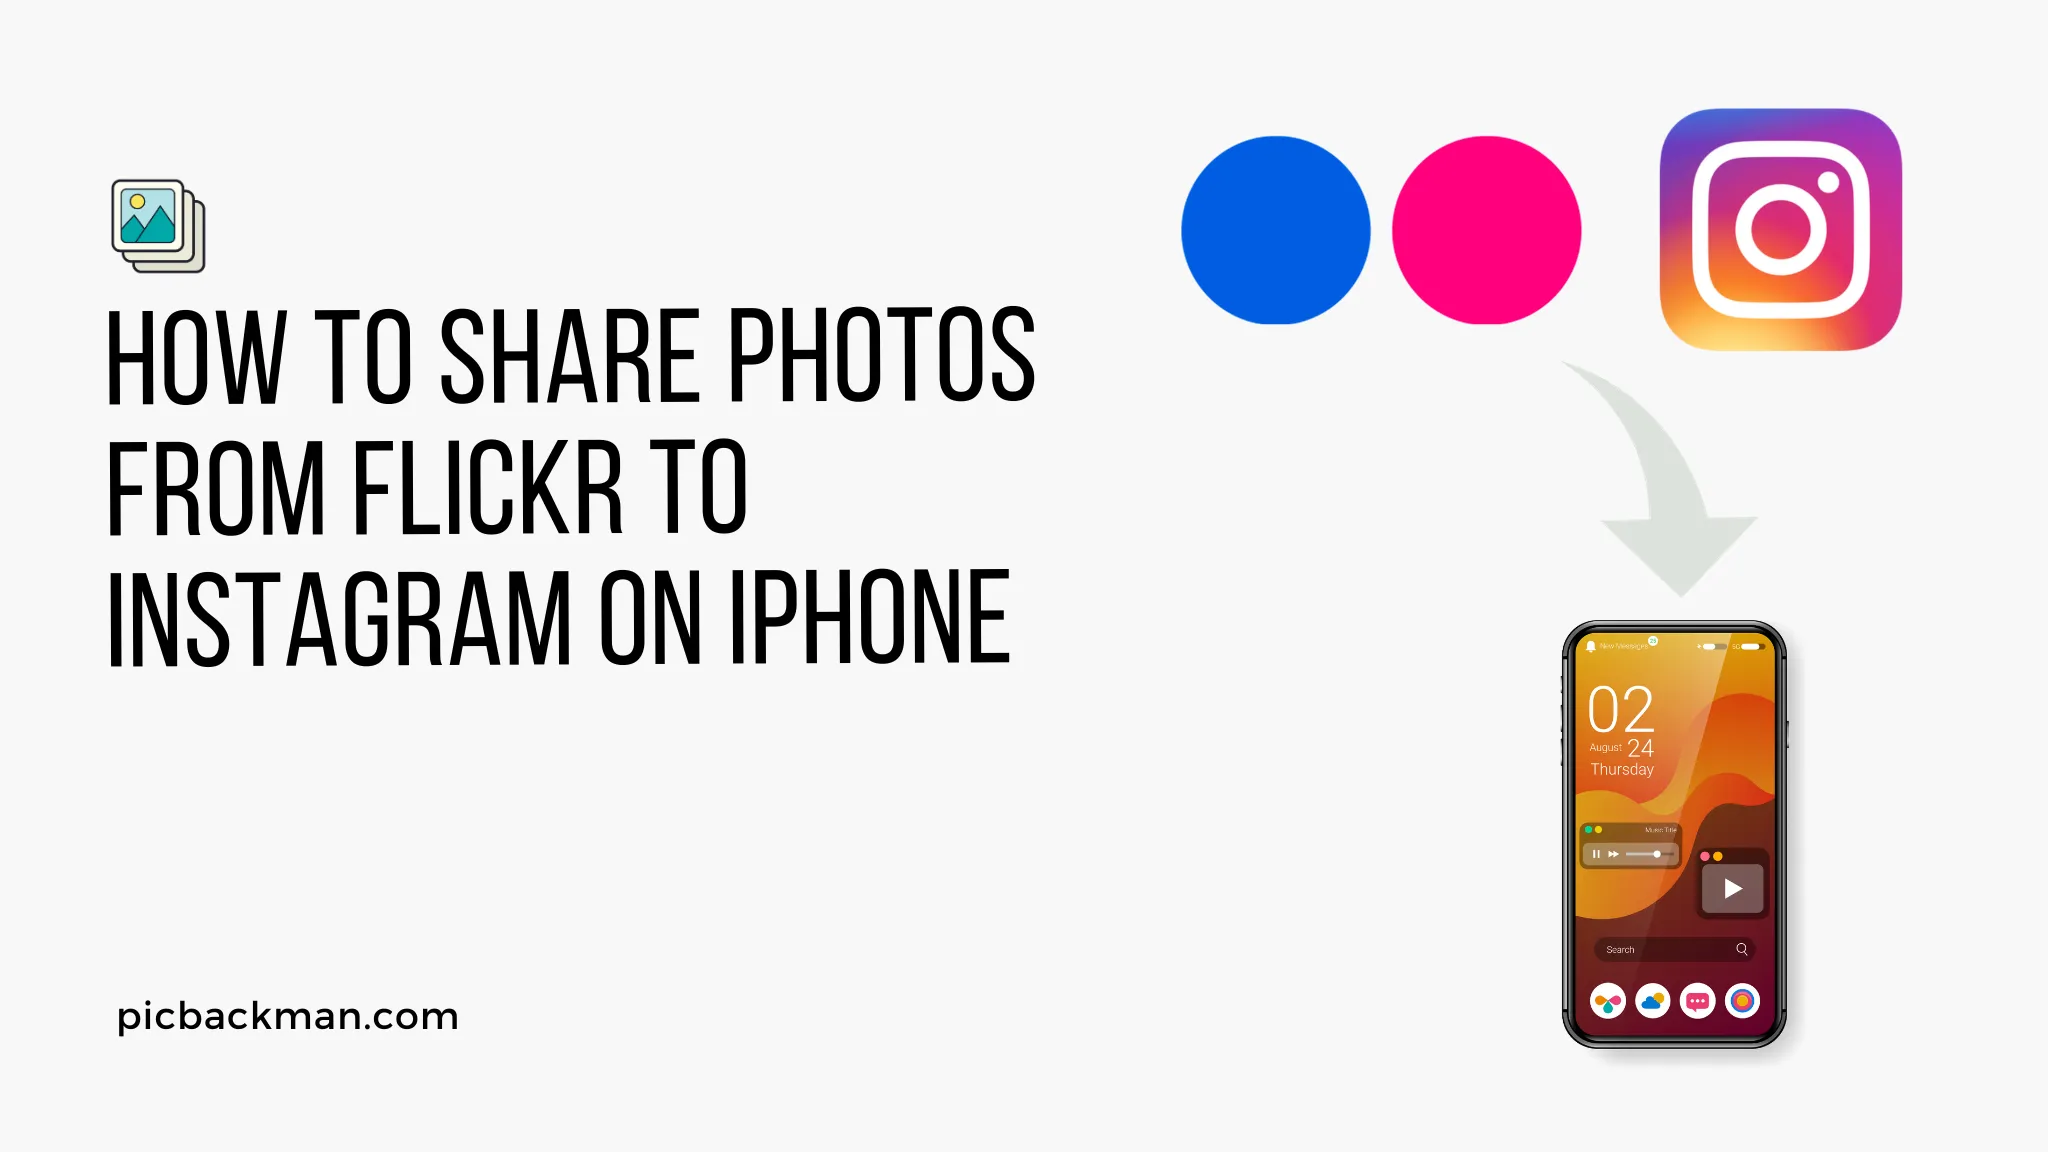 How to Share Photos from Flickr to Instagram on iPhone